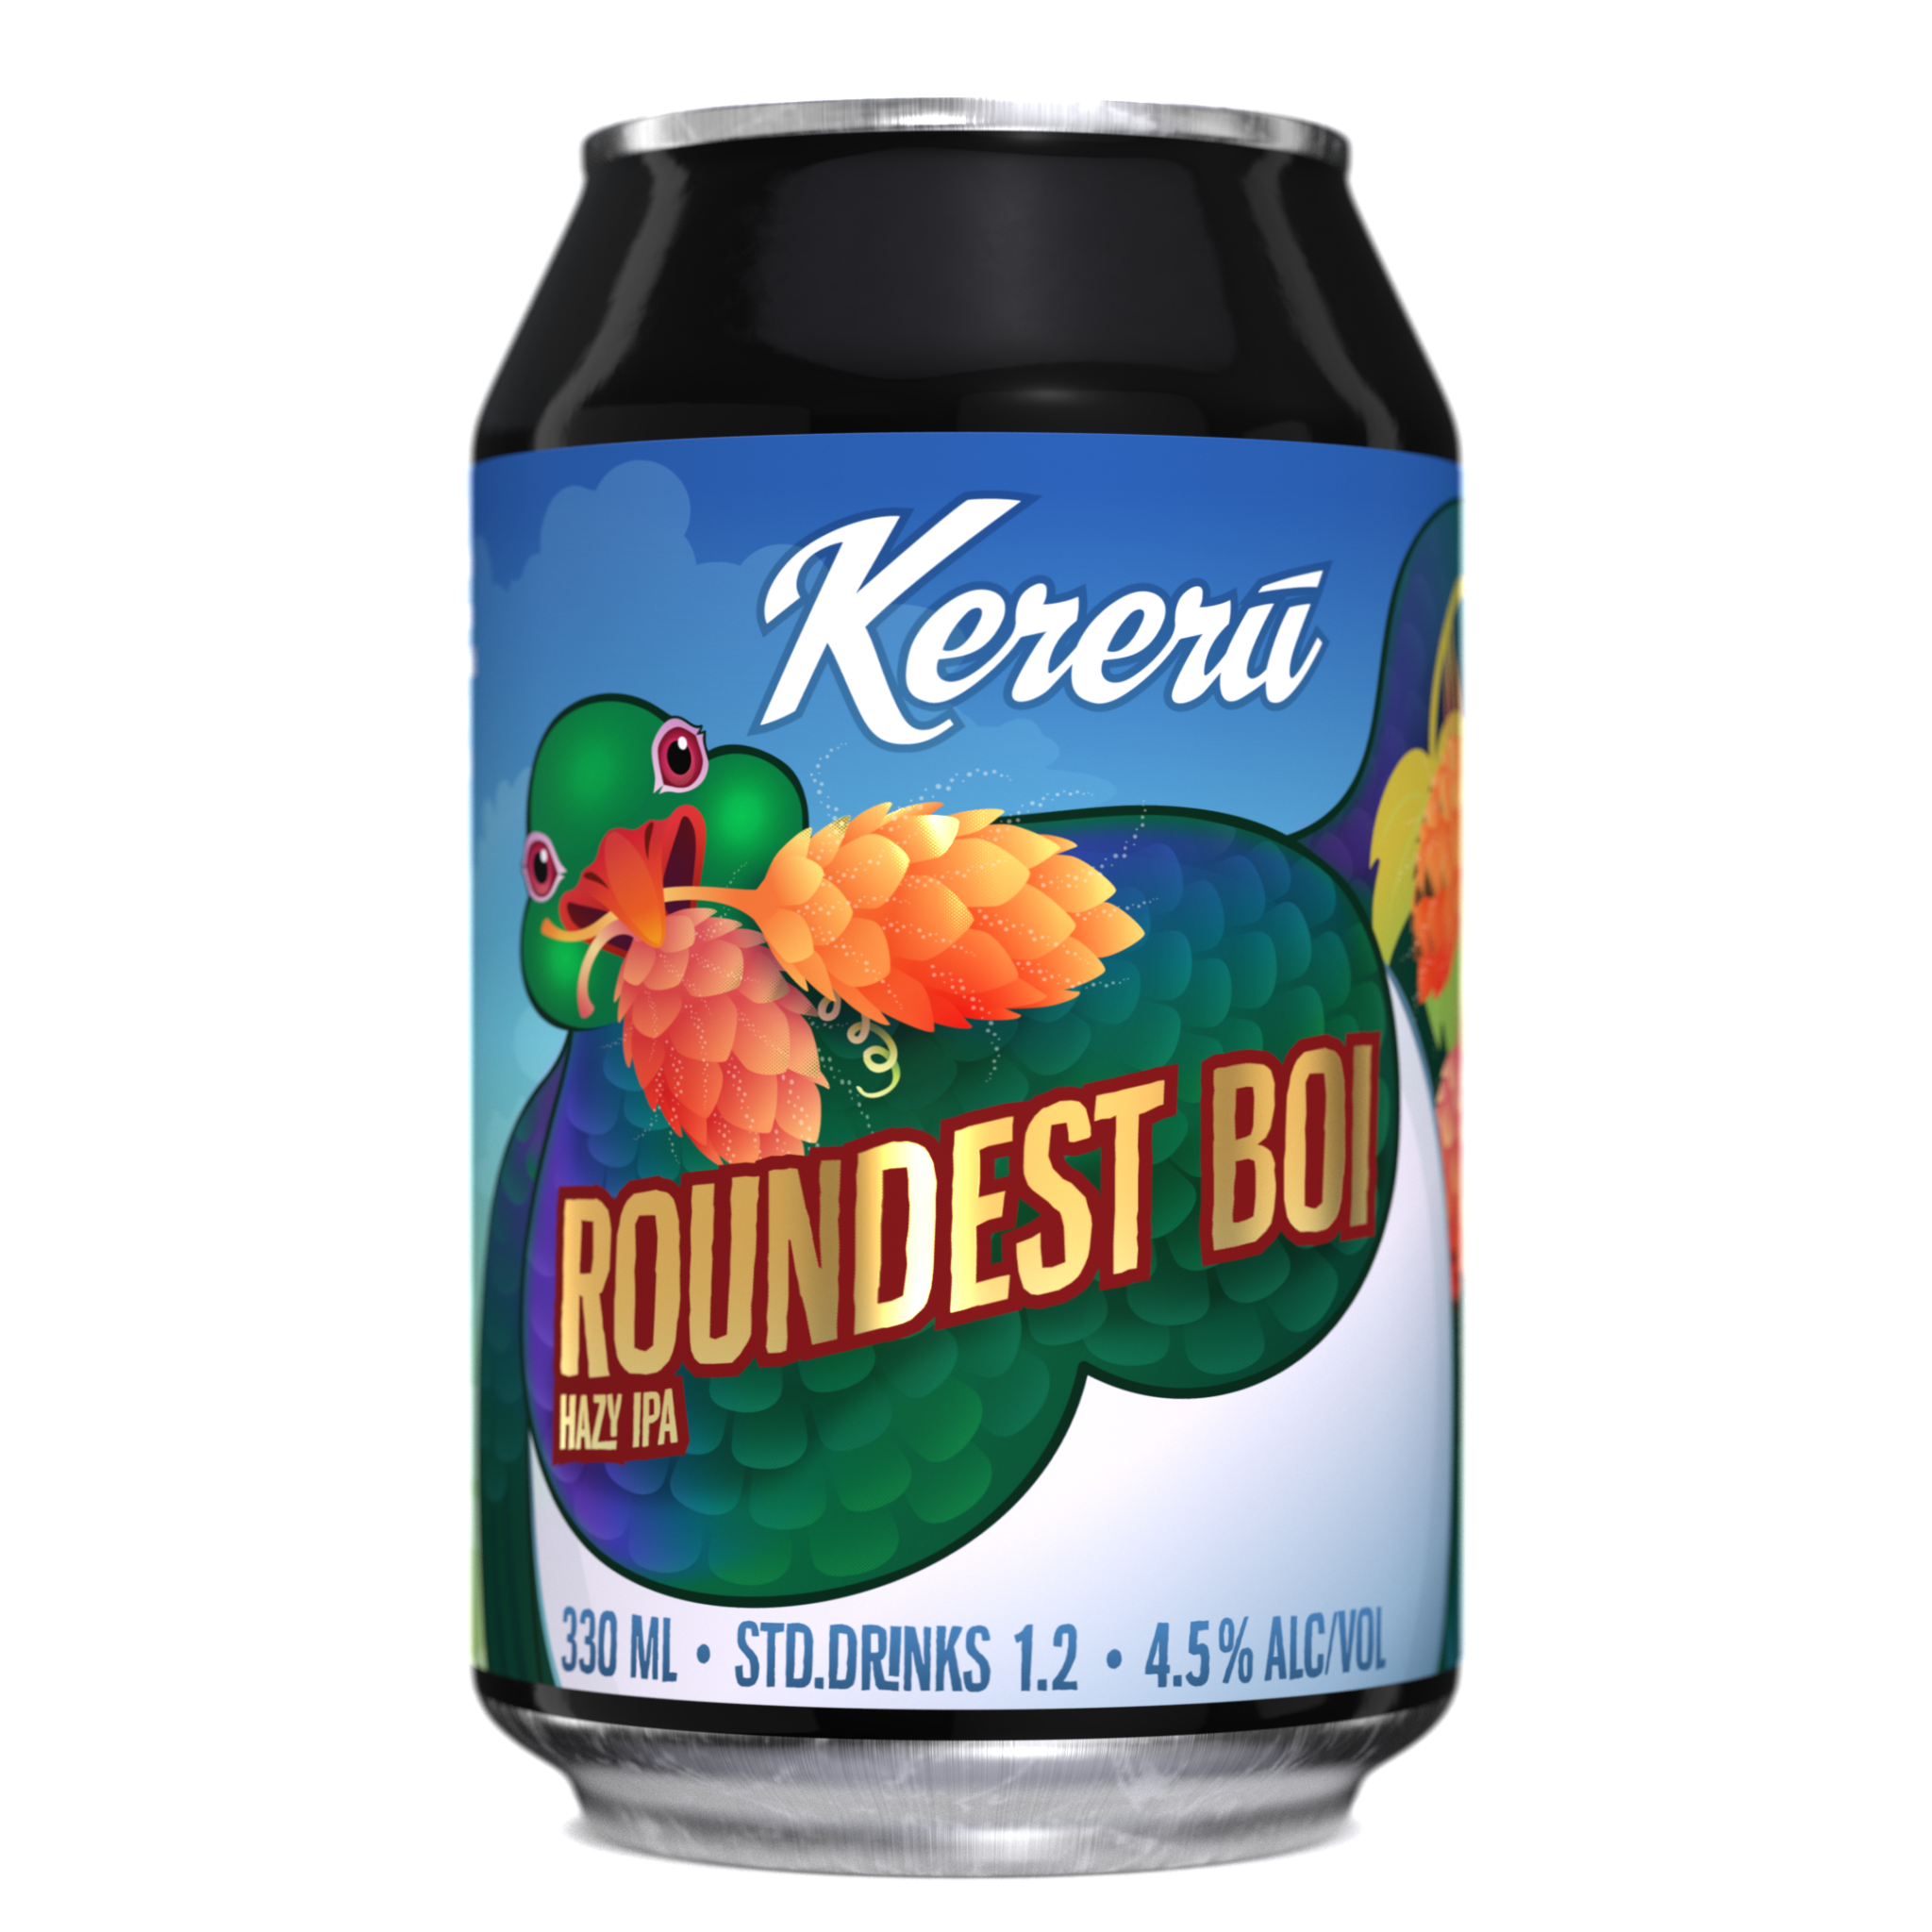 Featured Beer: Roundest Boi Hazy IPA